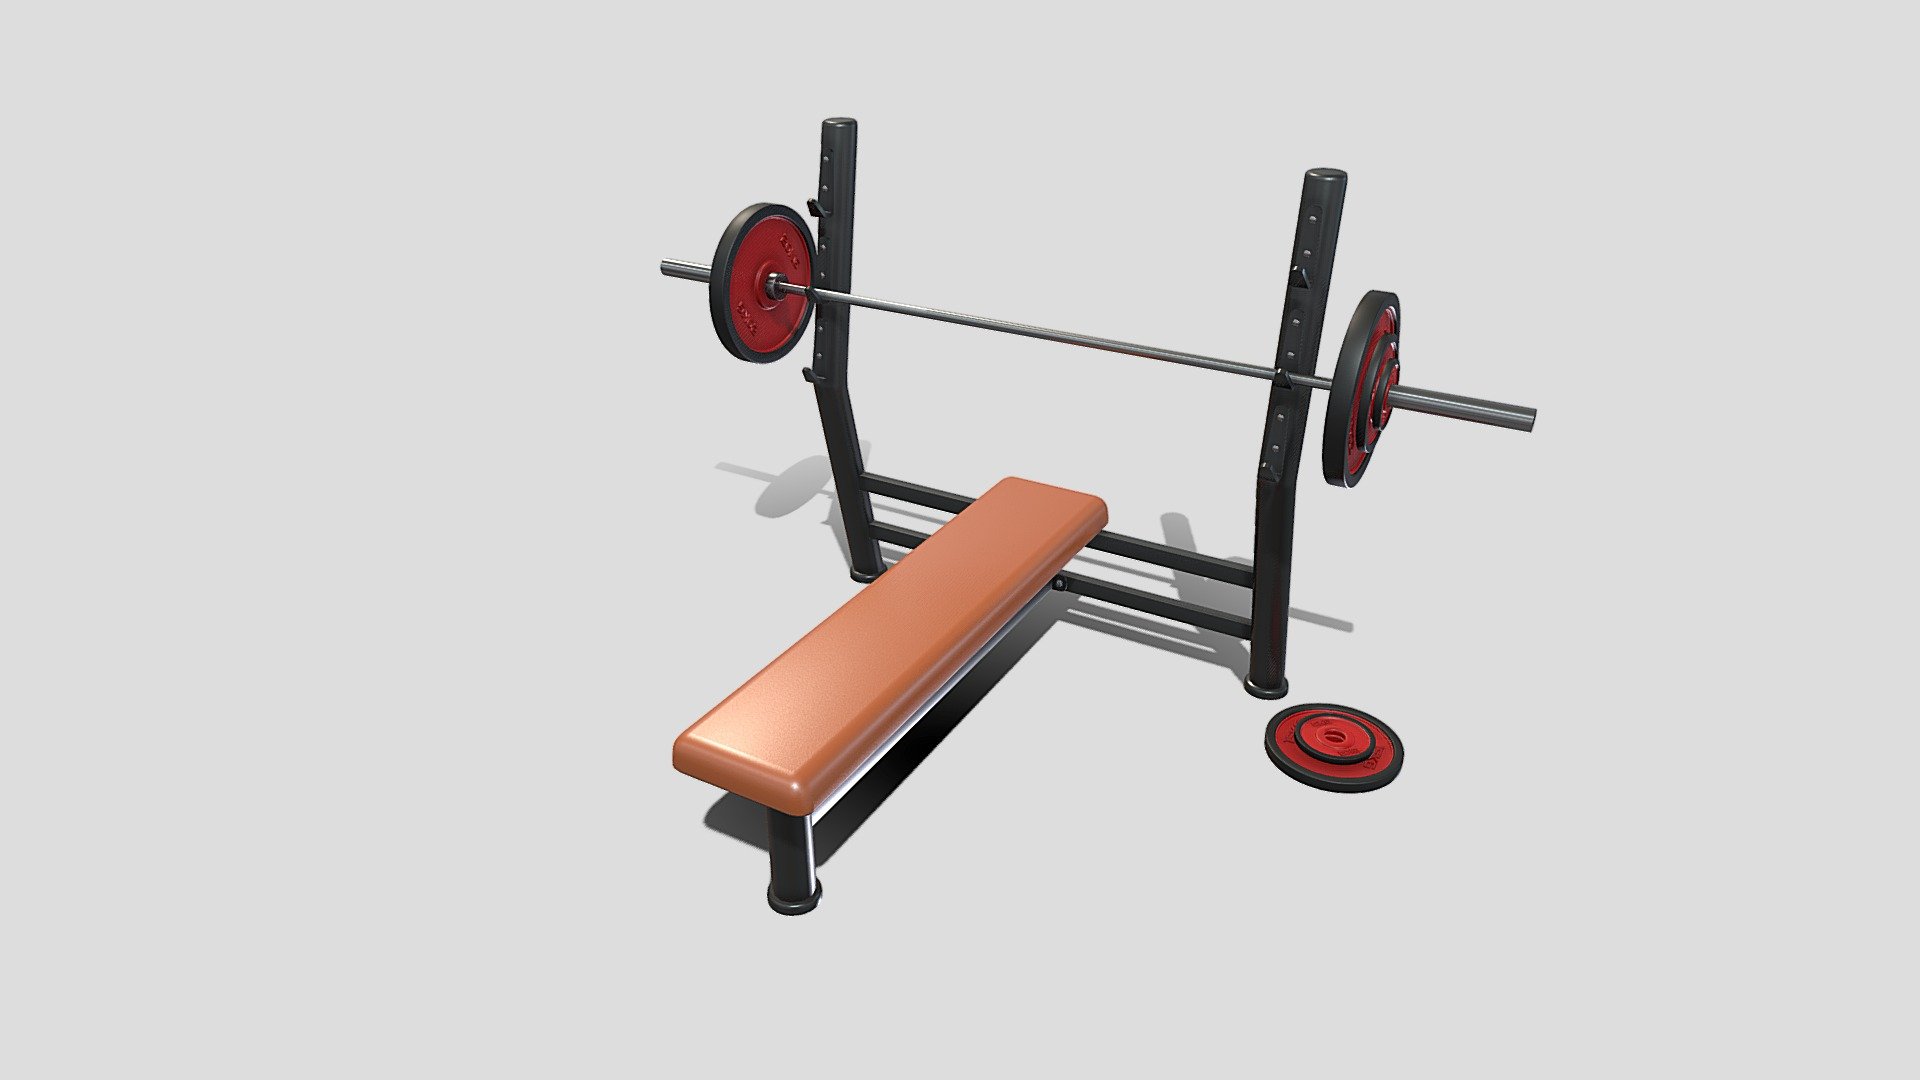 Gym machine 3d model built to real size, rendered with Cycles in Blender, as per seen on attached images. 

File formats:
-.blend, rendered with cycles, as seen in the images;
-.obj, with materials applied;
-.dae, with materials applied;
-.fbx, with materials applied;
-.stl;

Files come named appropriately and split by file format.

3D Software:
The 3D model was originally created in Blender 3.1 and rendered with Cycles.

Materials and textures:
The models have materials applied in all formats, and are ready to import and render.
Materials are image based using PBR, the model comes with four 4k png image textures for the rack, and four 1k textures for the disks.

Preview scenes:
The preview images are rendered in Blender using its built-in render engine &lsquo;Cycles'.
Note that the blend files come directly with the rendering scene included and the render command will generate the exact result as seen in previews 3d model